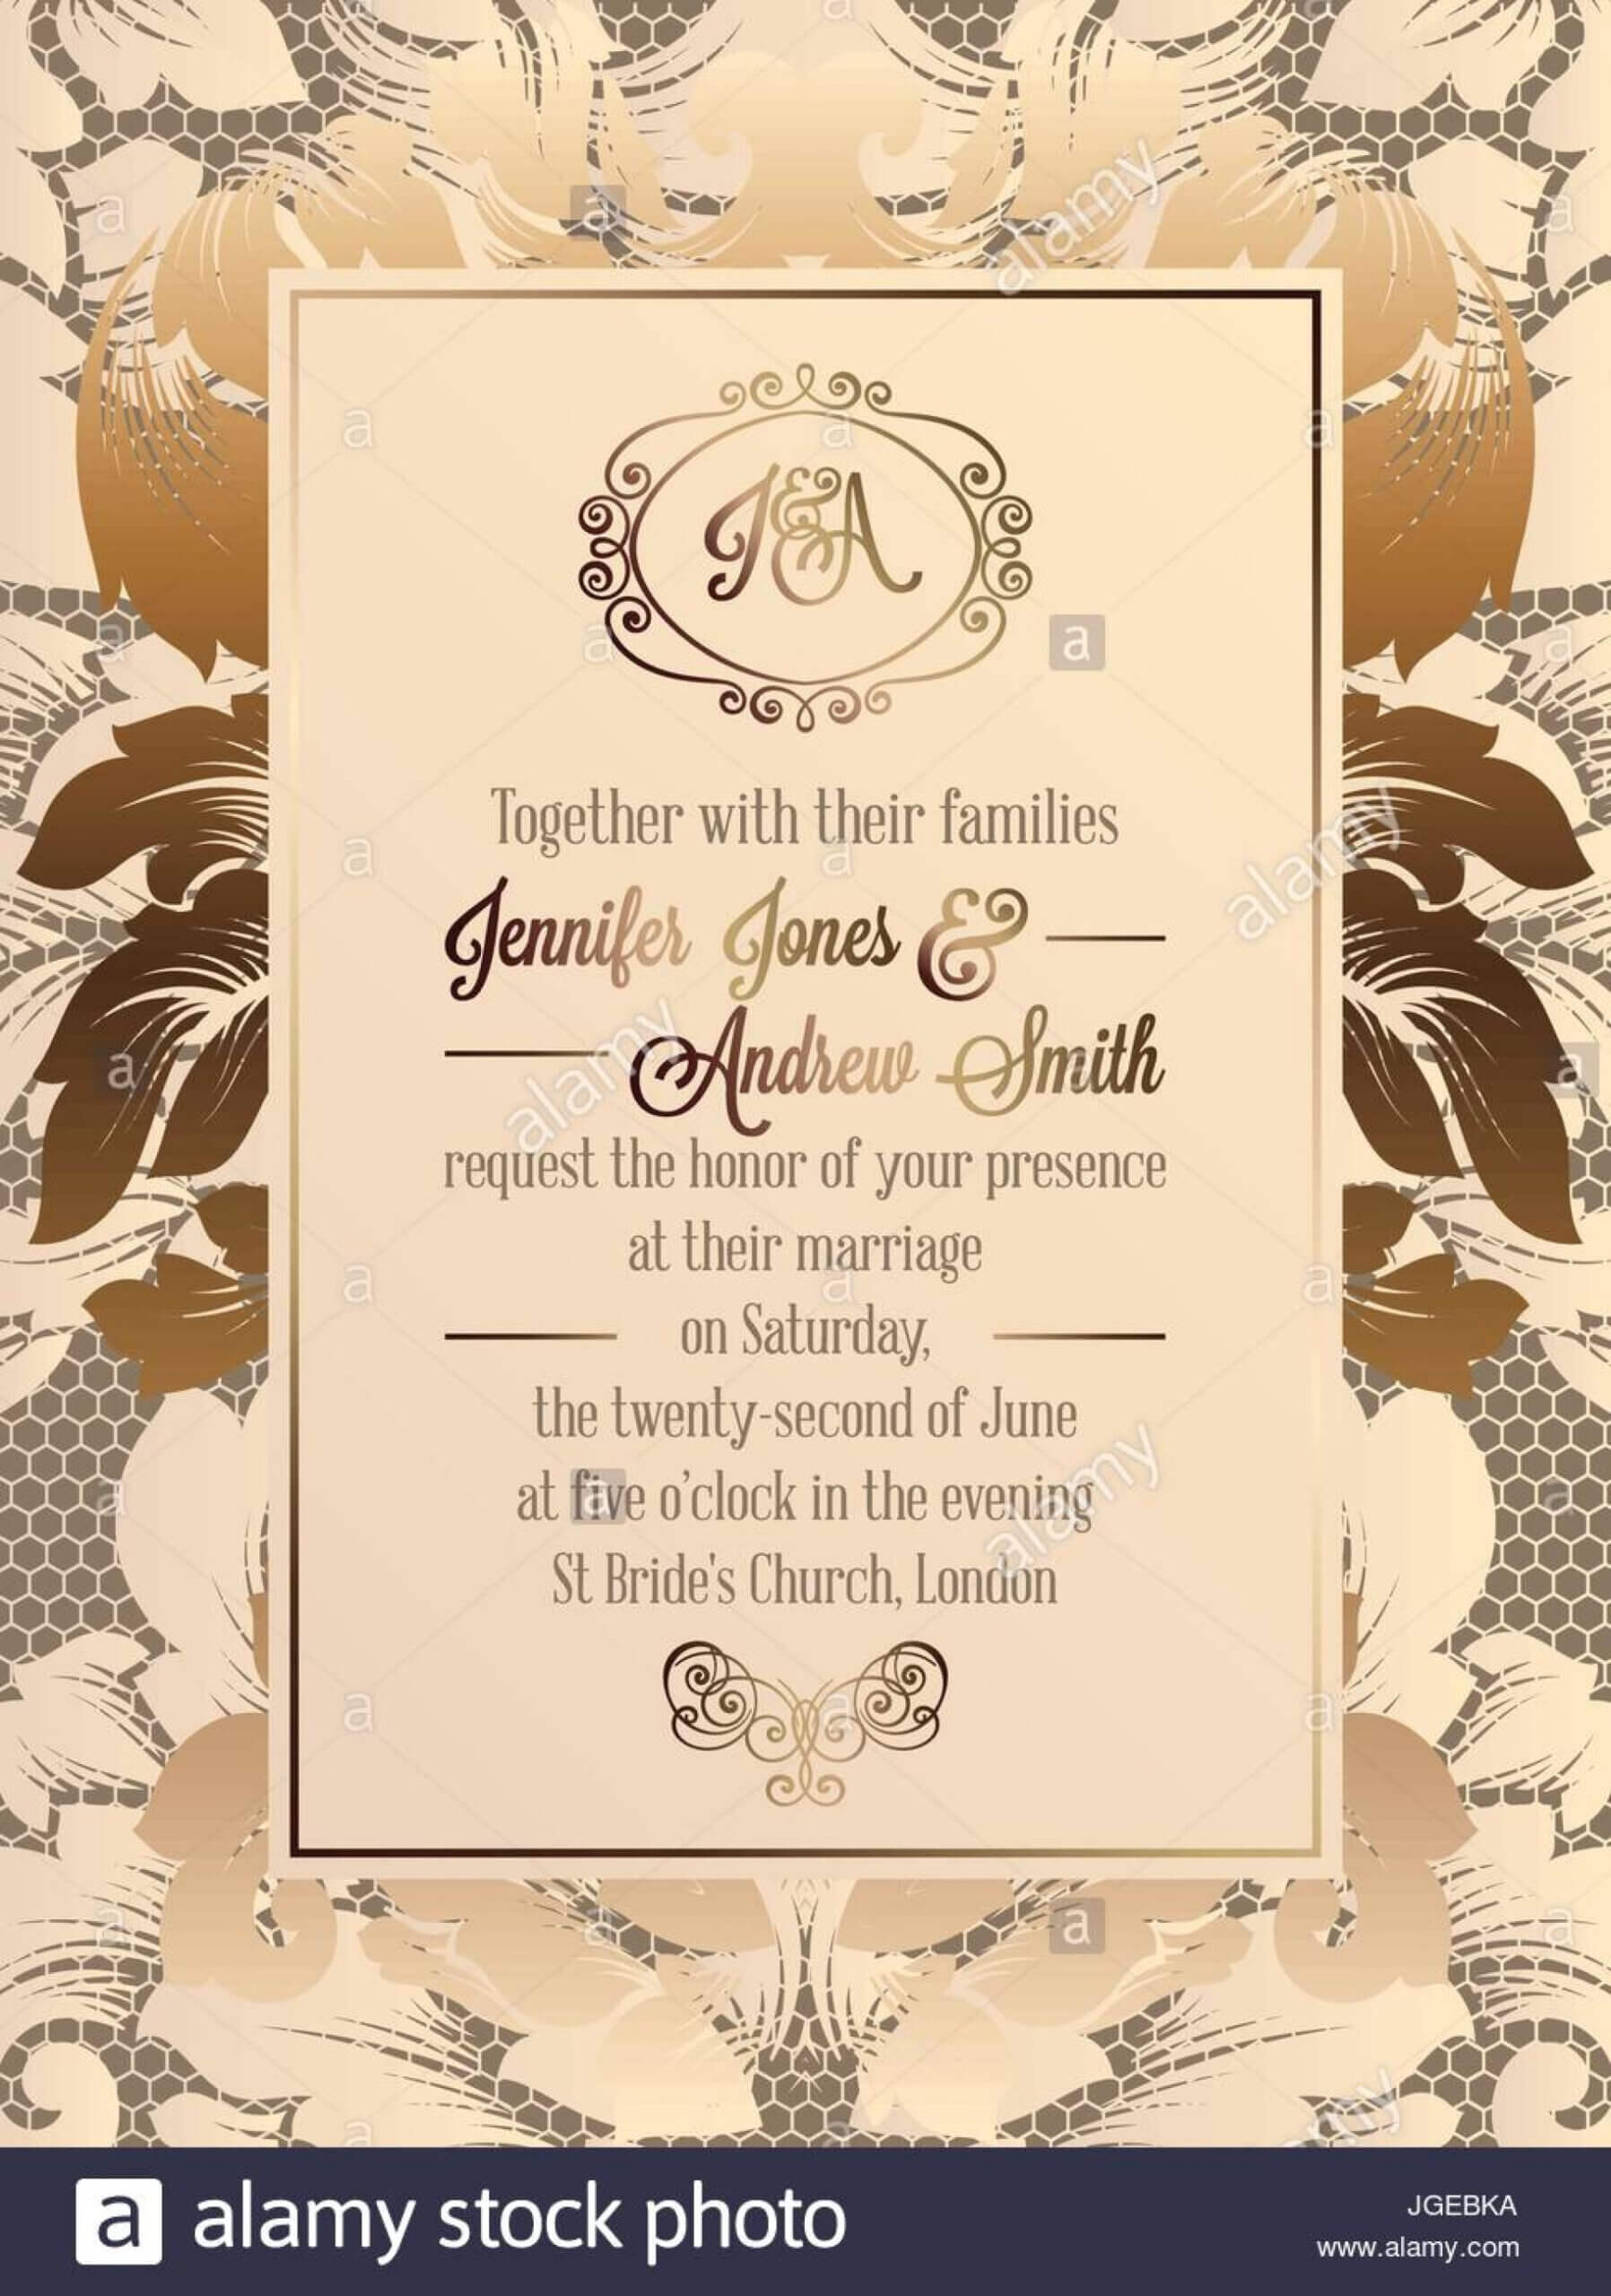 022 Template Ideas Gettyimages Church Invitation Cards Regarding Church Invite Cards Template